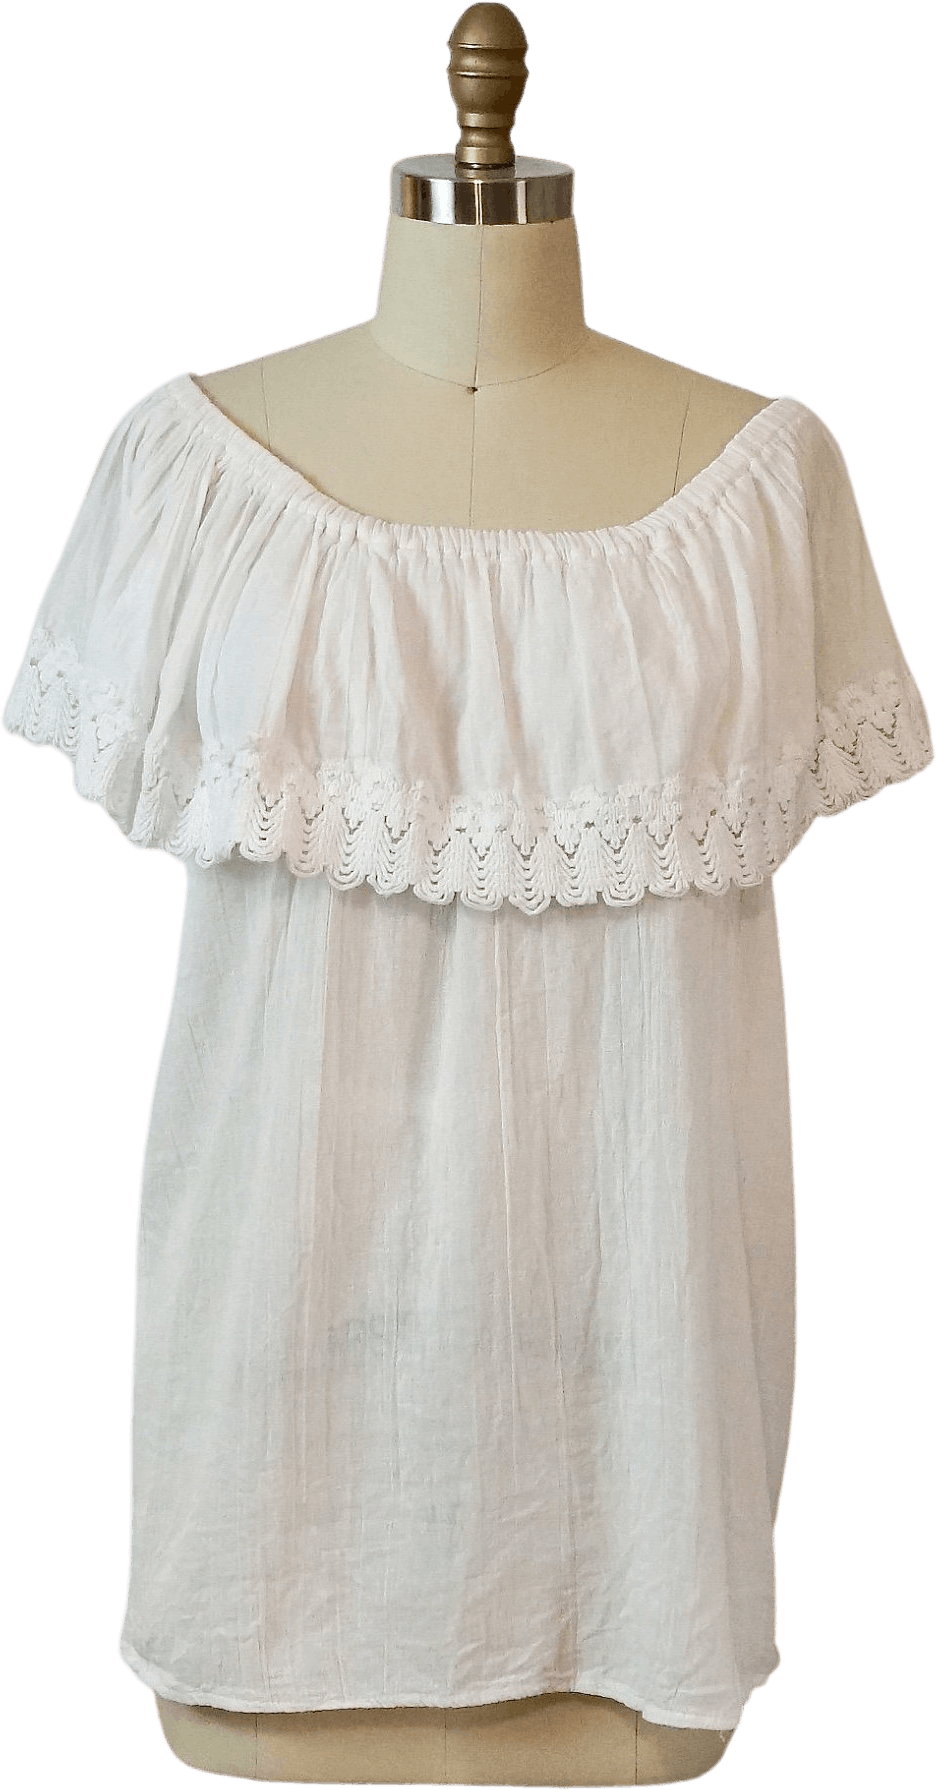 Vintage 80’s White Off the Shoulder Ruffle Top Blouse | Shop THRILLING